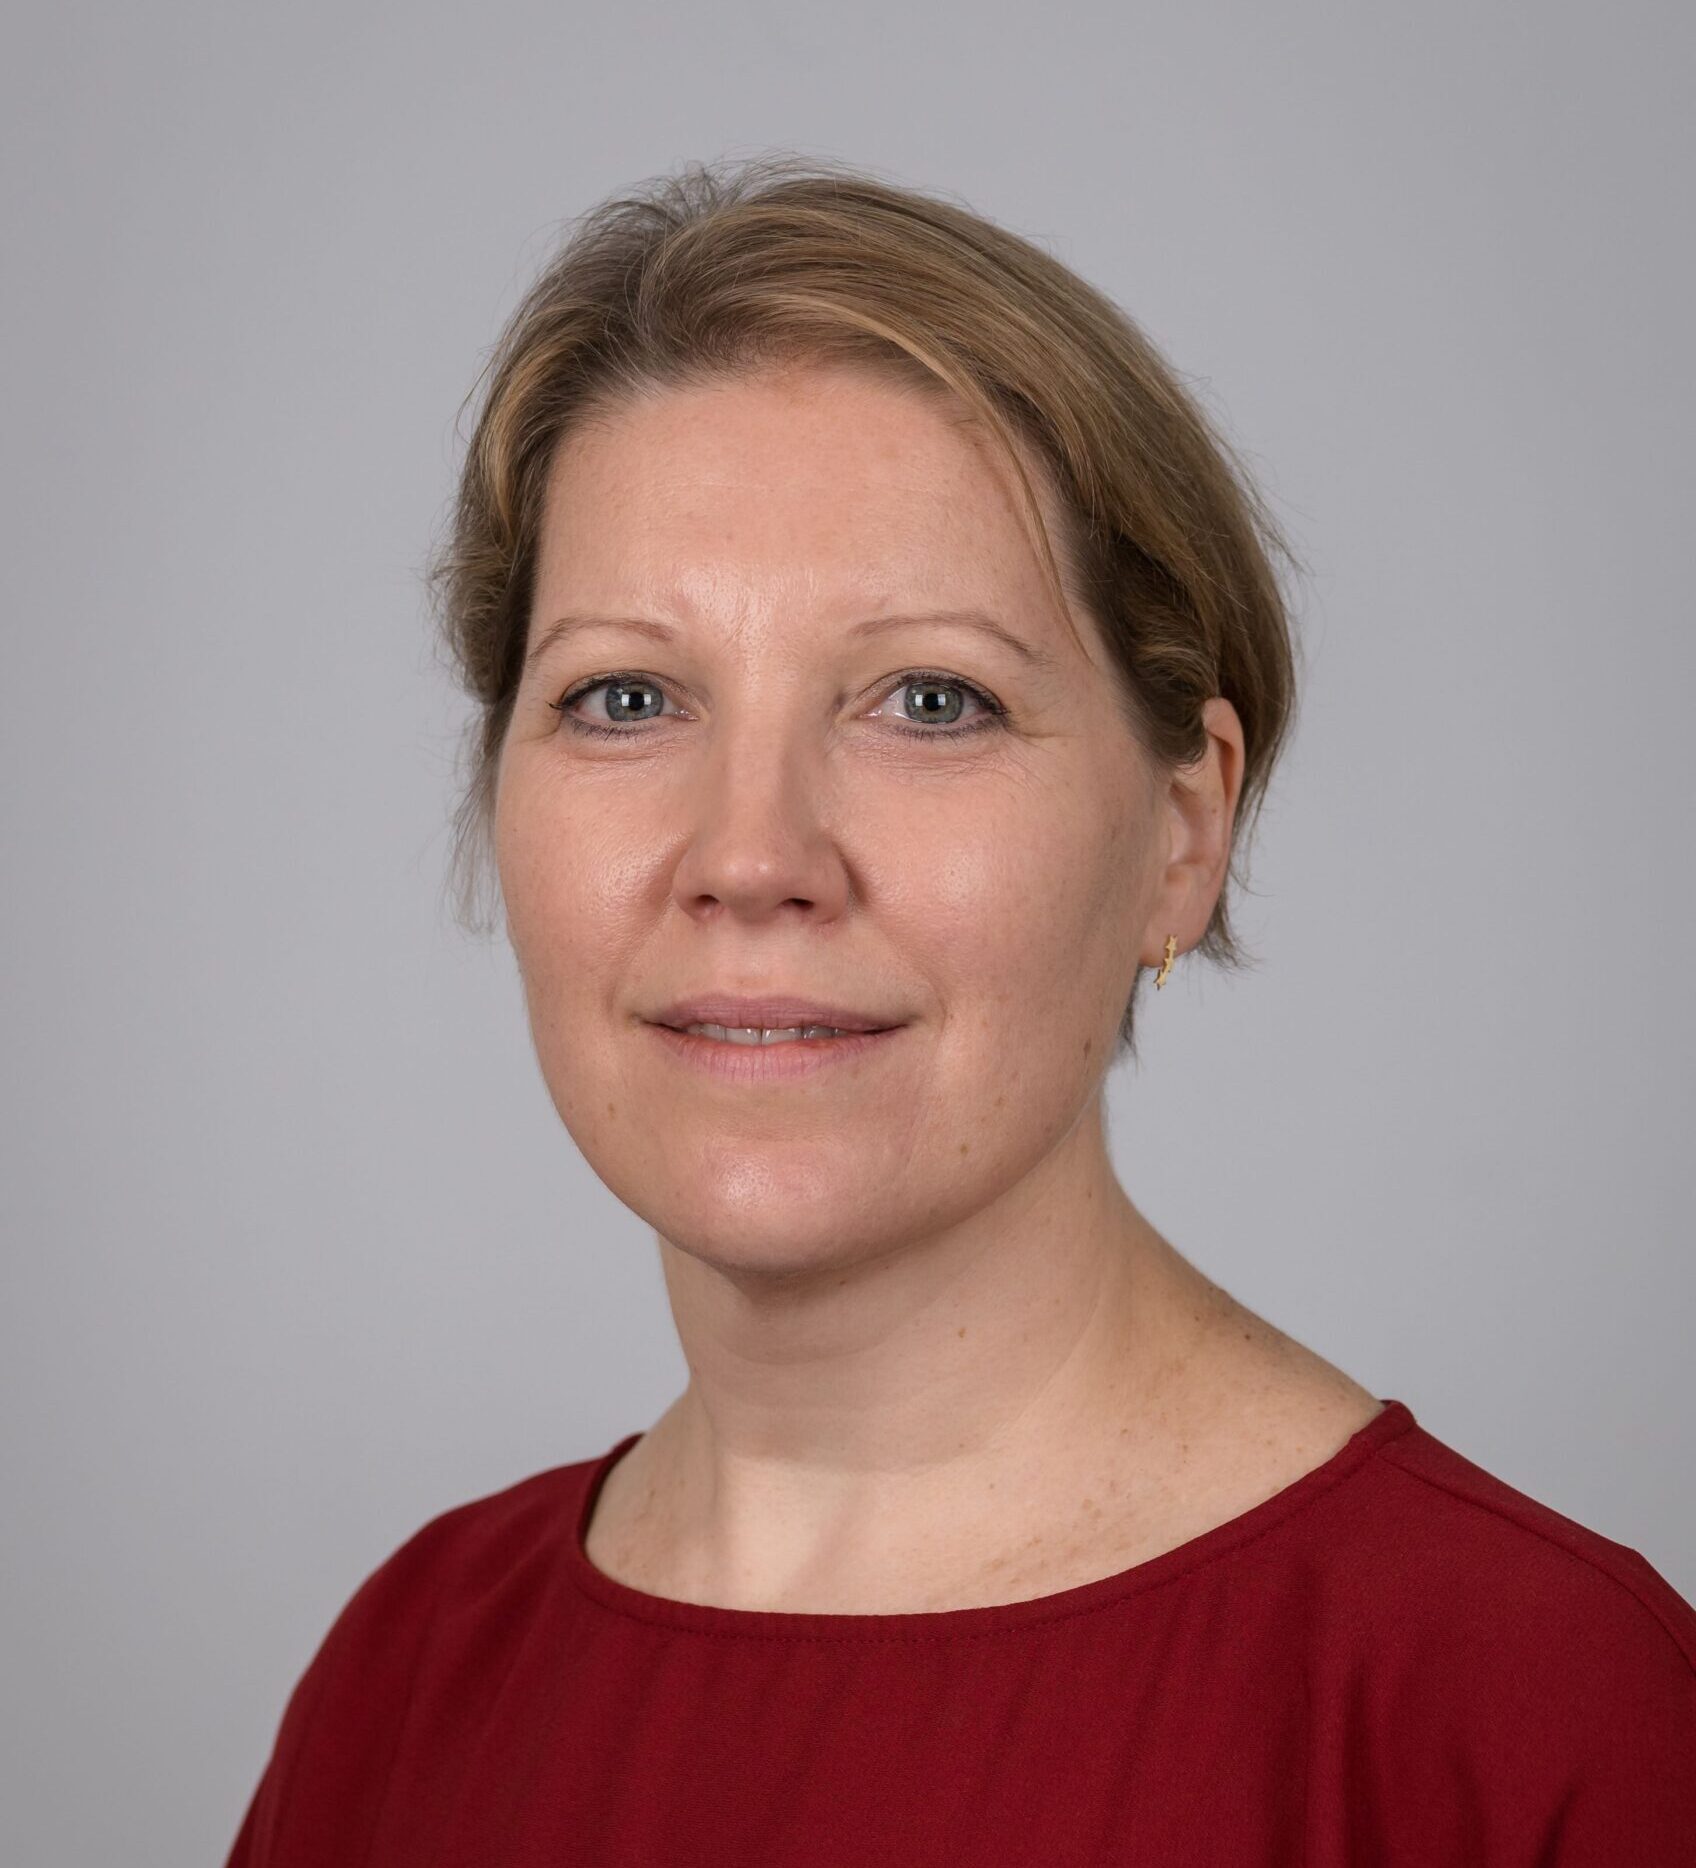 Portrait of Caroline Hacker, the Chief Operating Officer for the Northern Ireland Office. She wears a red top and has her hair tied back.